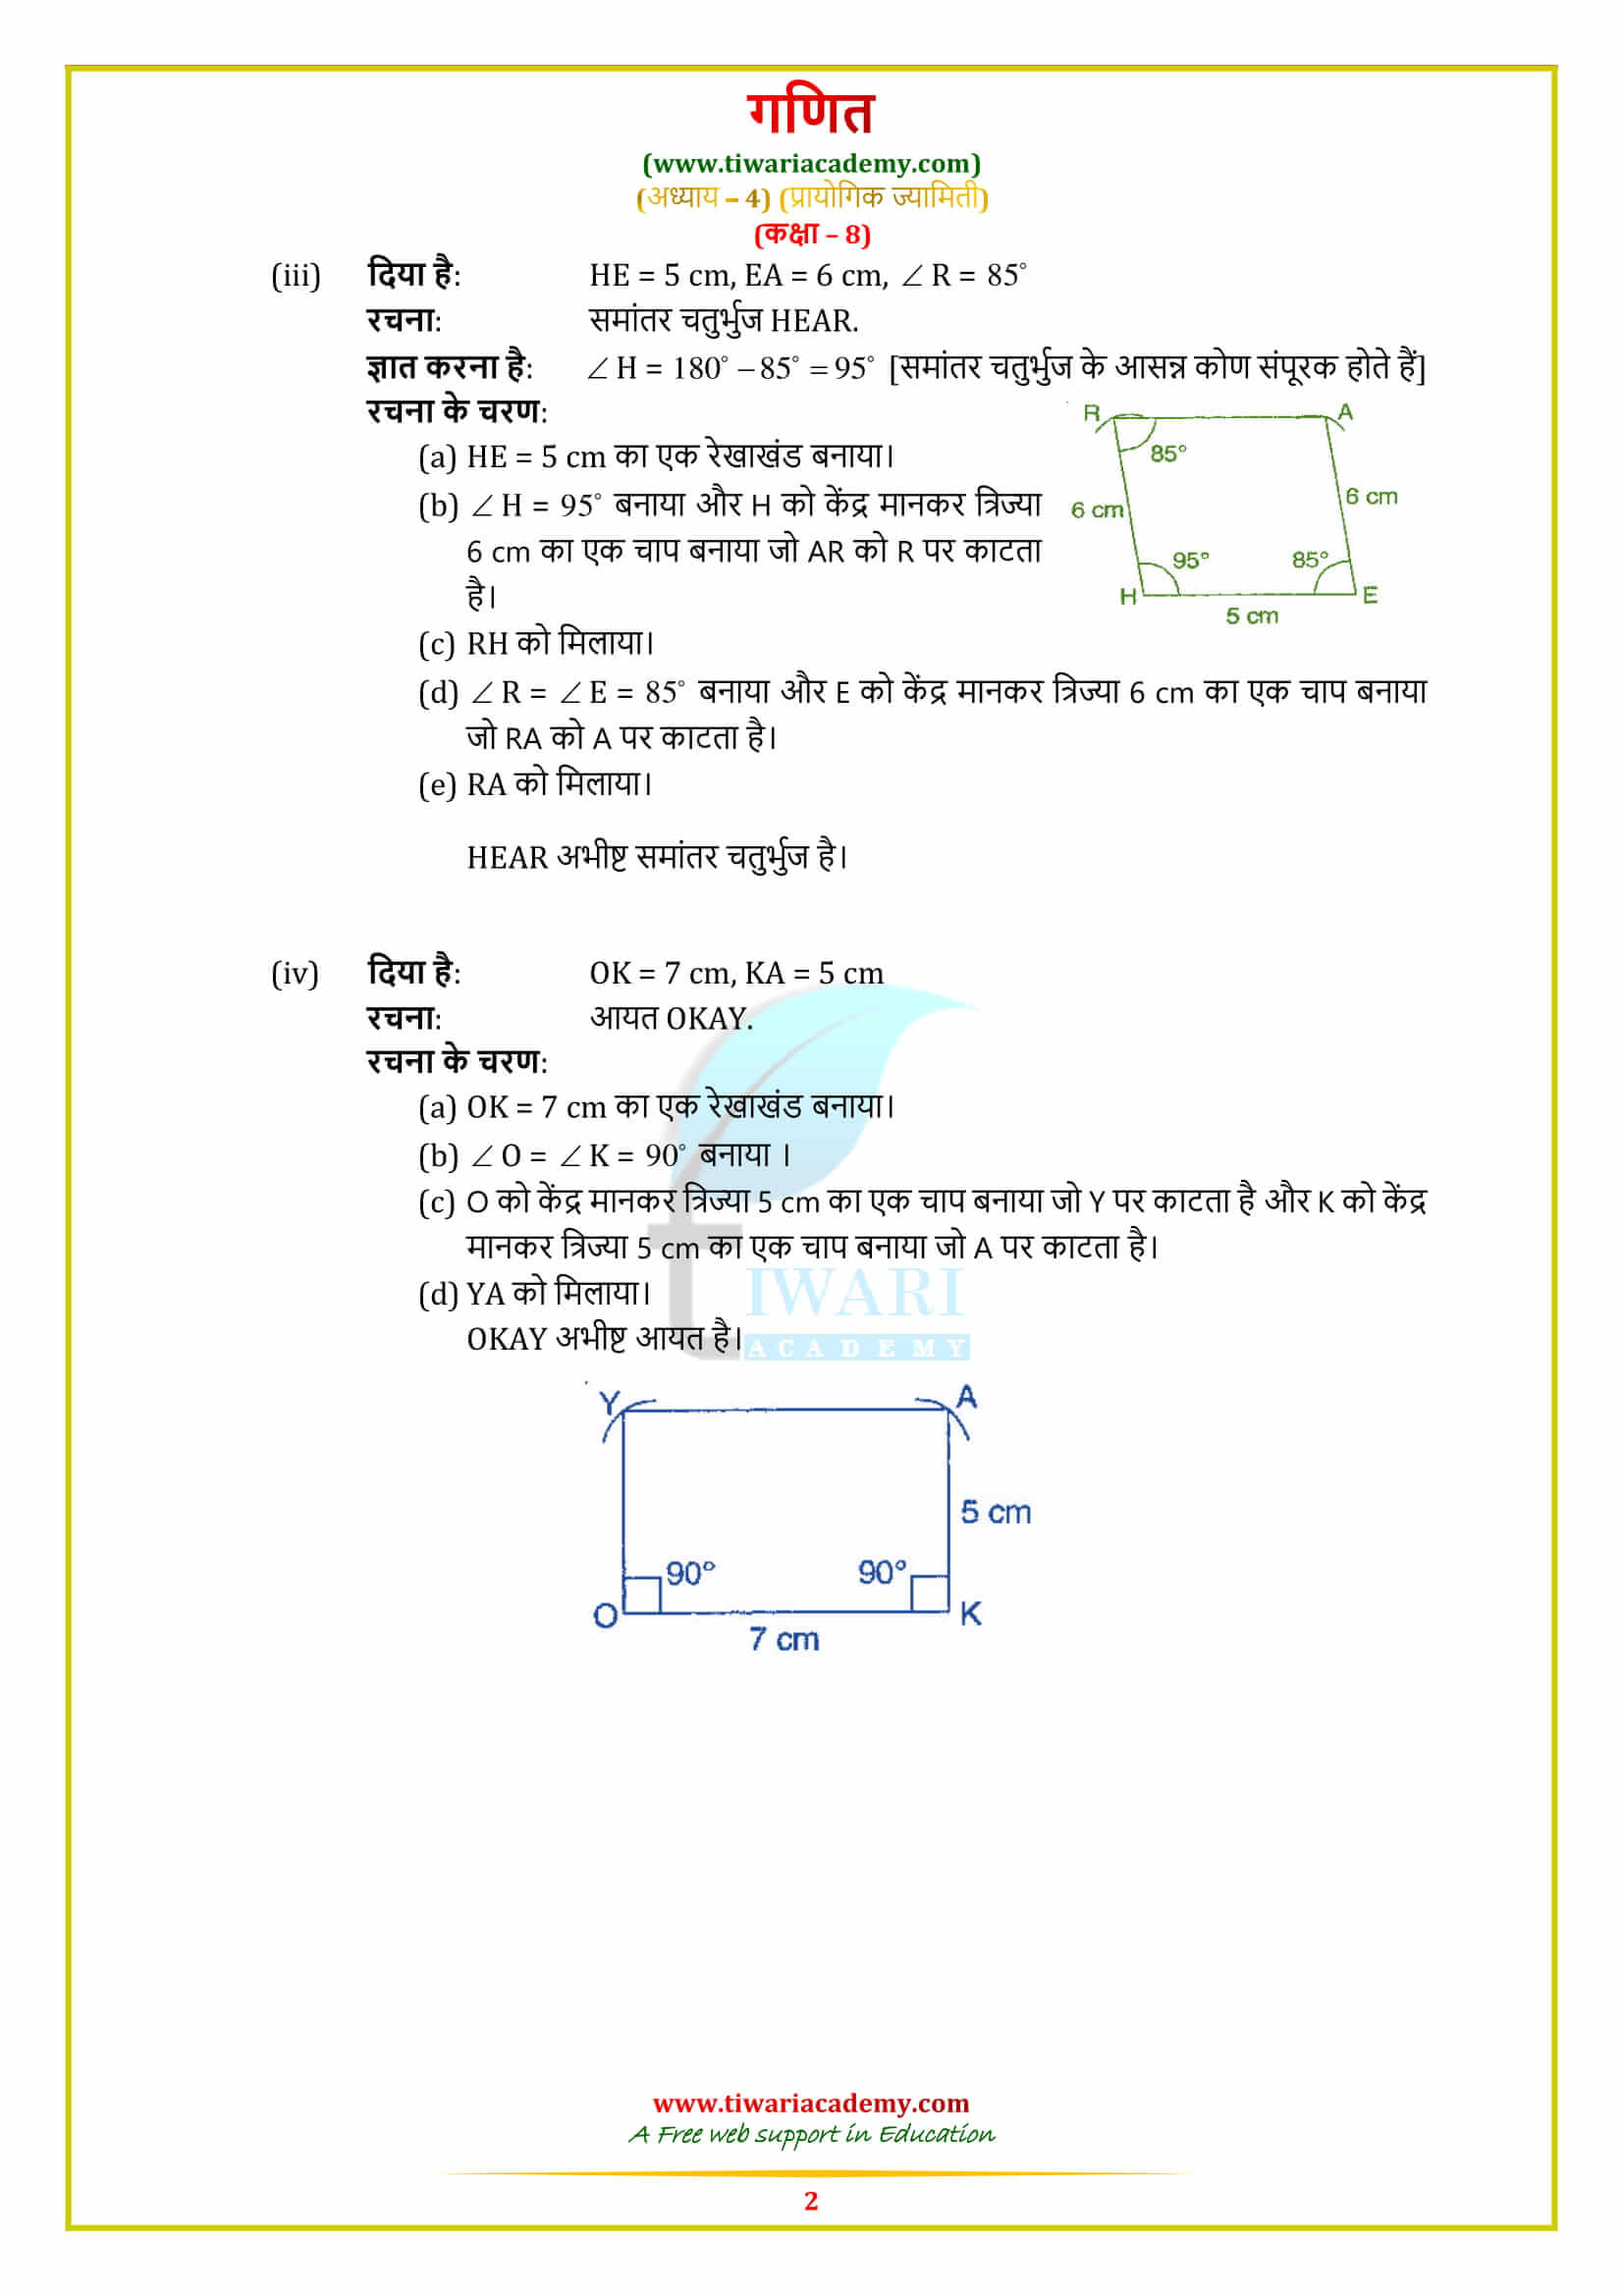 8 Maths Exercise 4.3 Solutions in hindi guide all questions